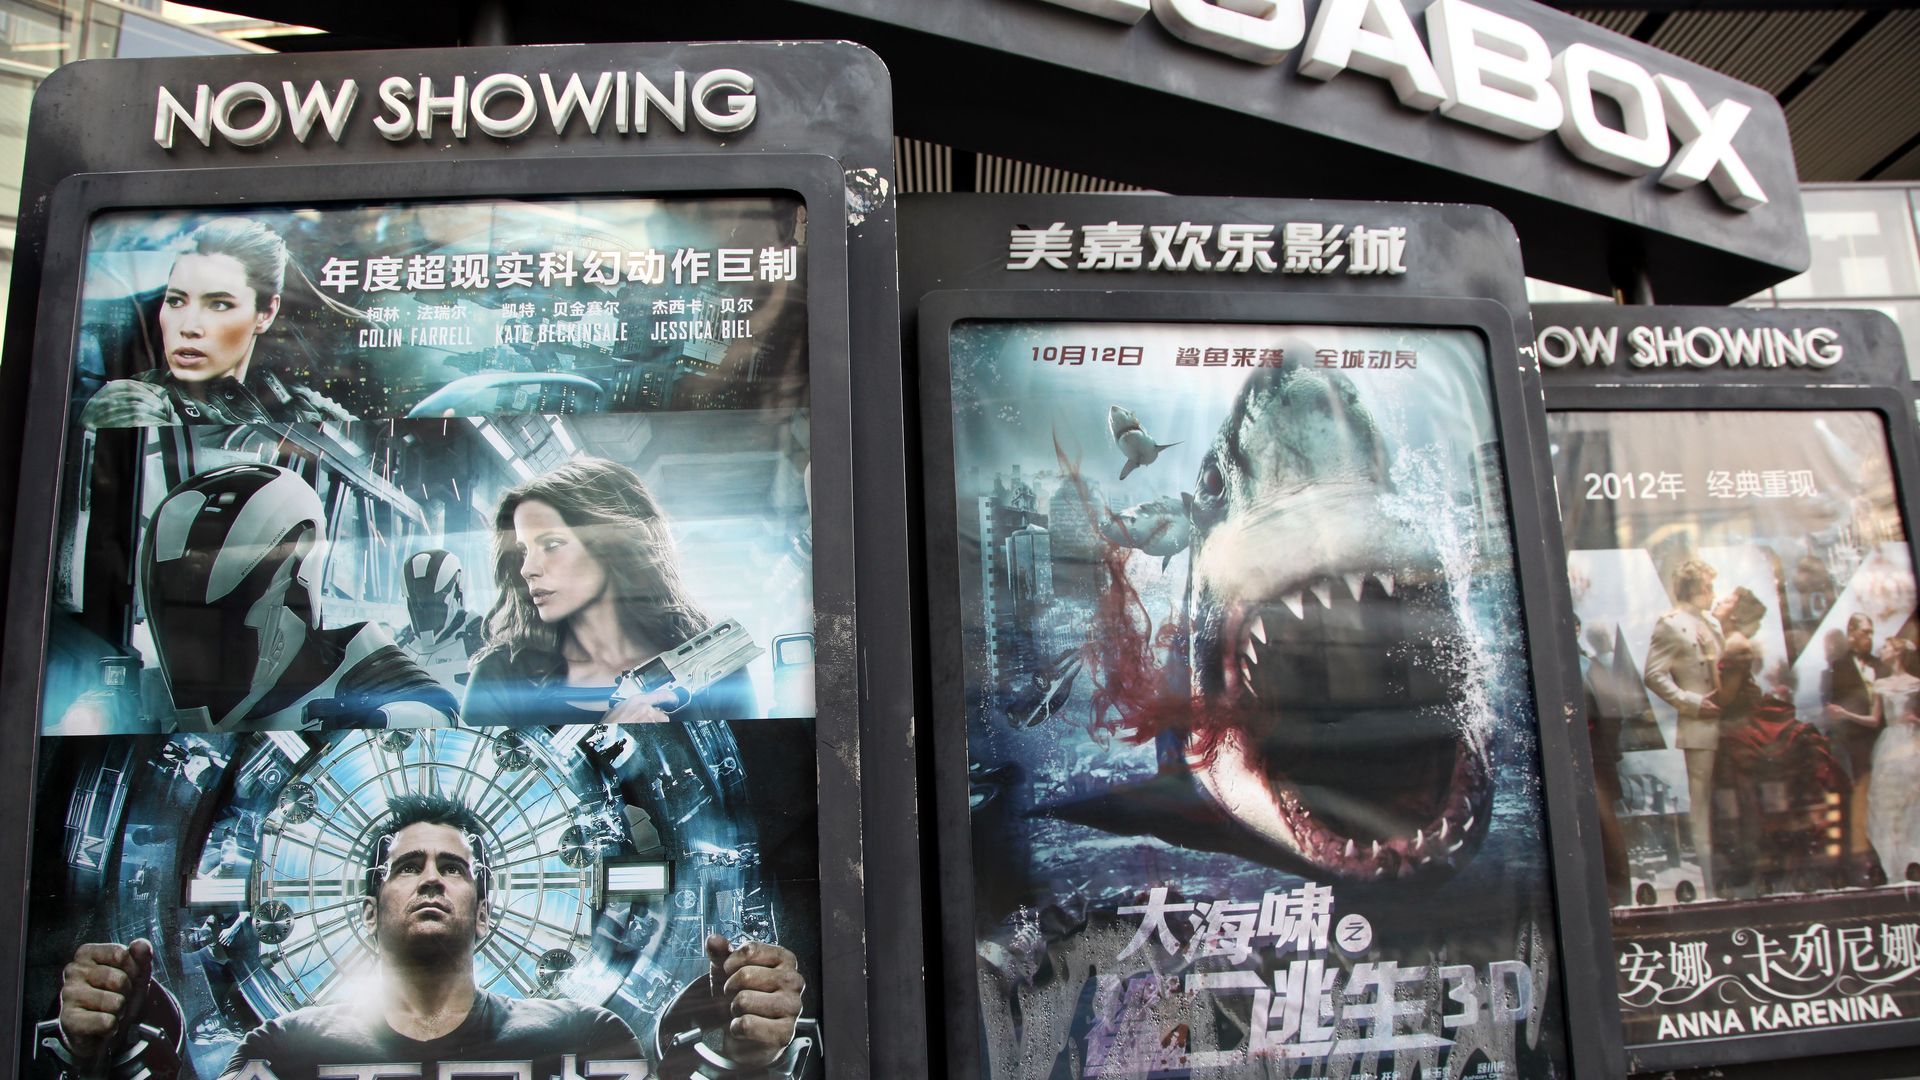 This image shows a row of  billboards in China showing movie posters with Chinese characters for American movies.